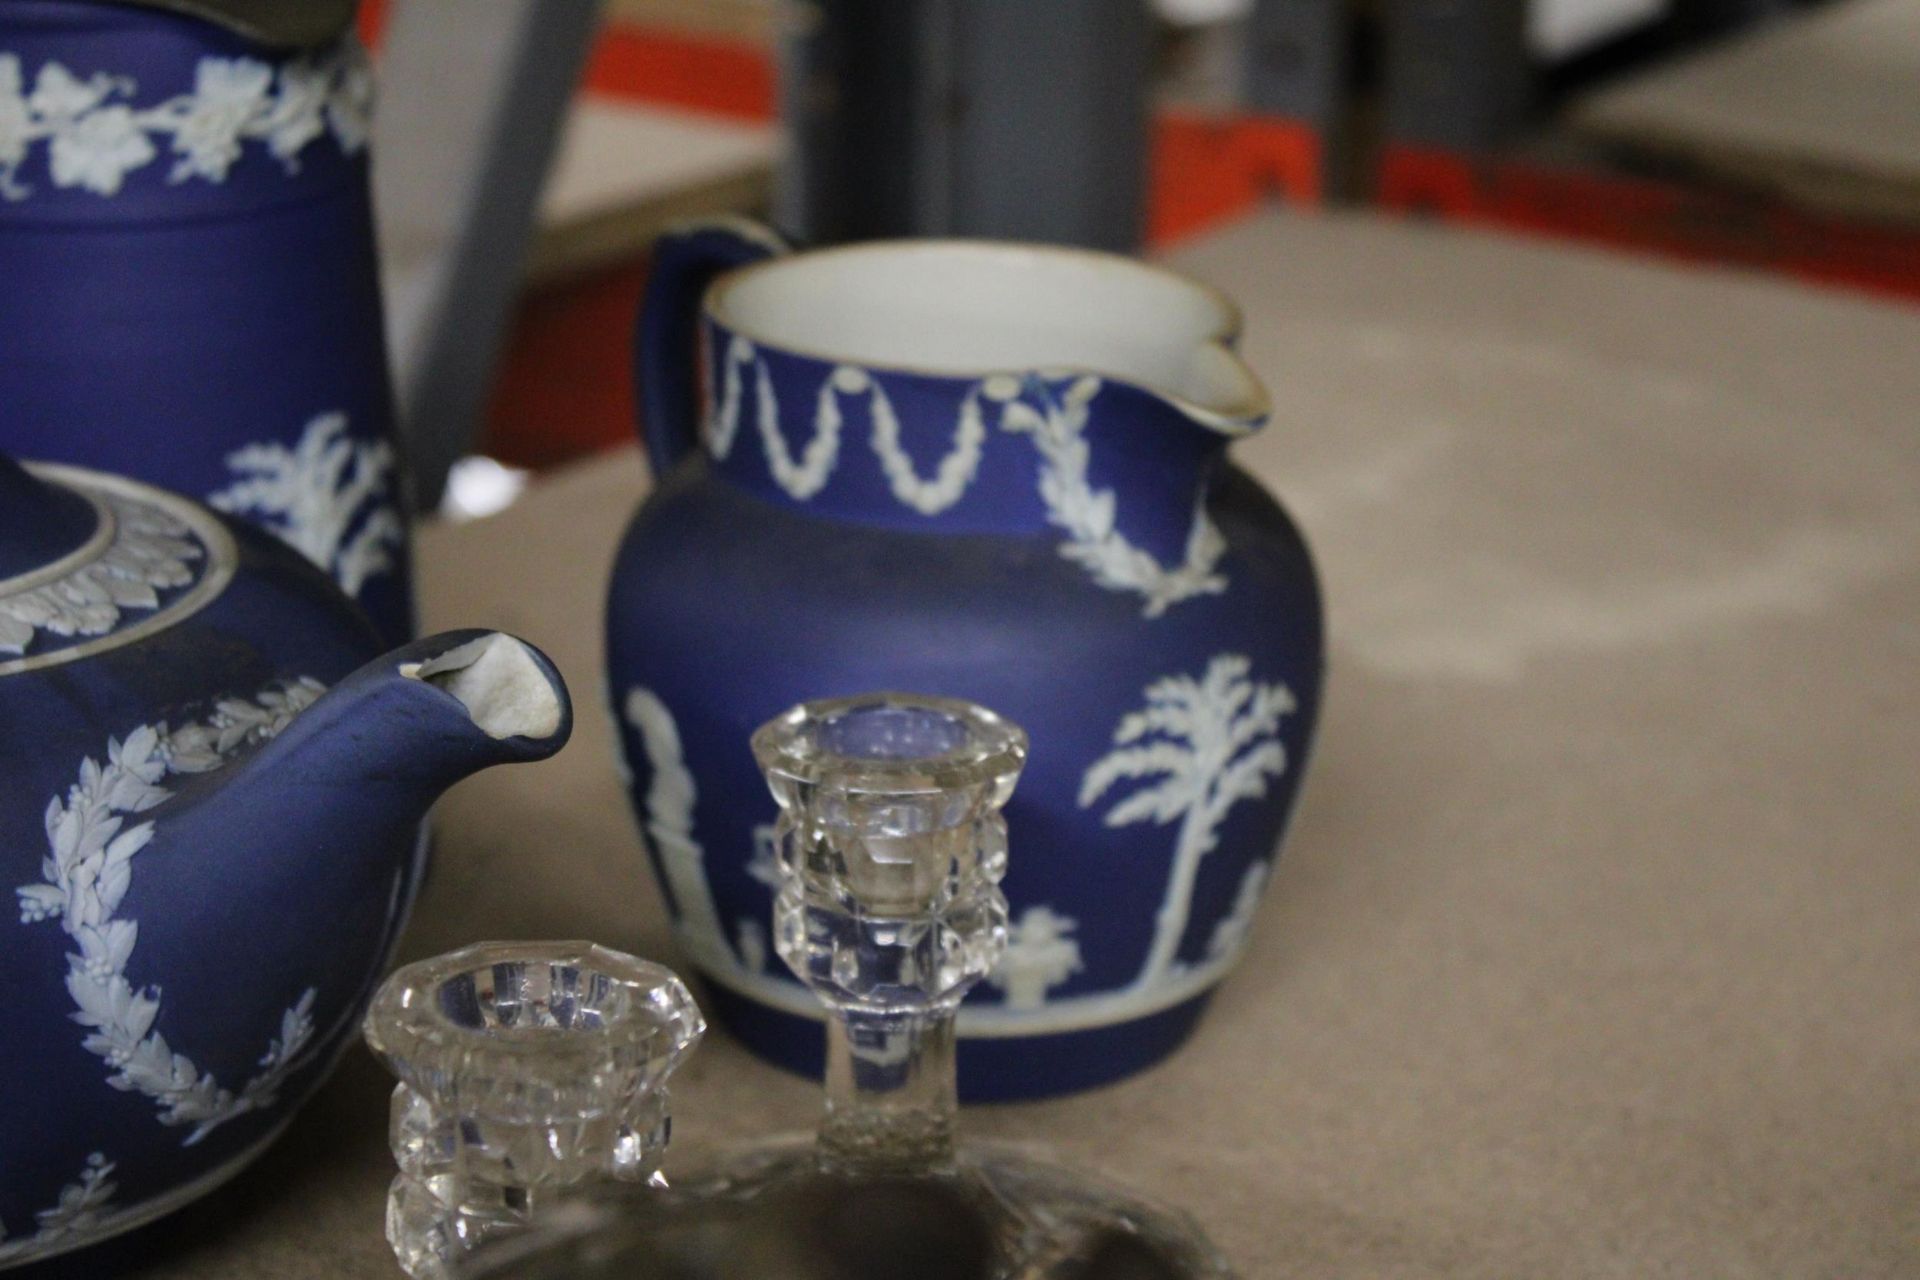 THREE PIECES OF DARK BLUE WEDGWOOD JASPERWARE TO INCLUDE A TEAPOT, PEWTER LIDDED JUG AND MILK JUG, - Image 4 of 6